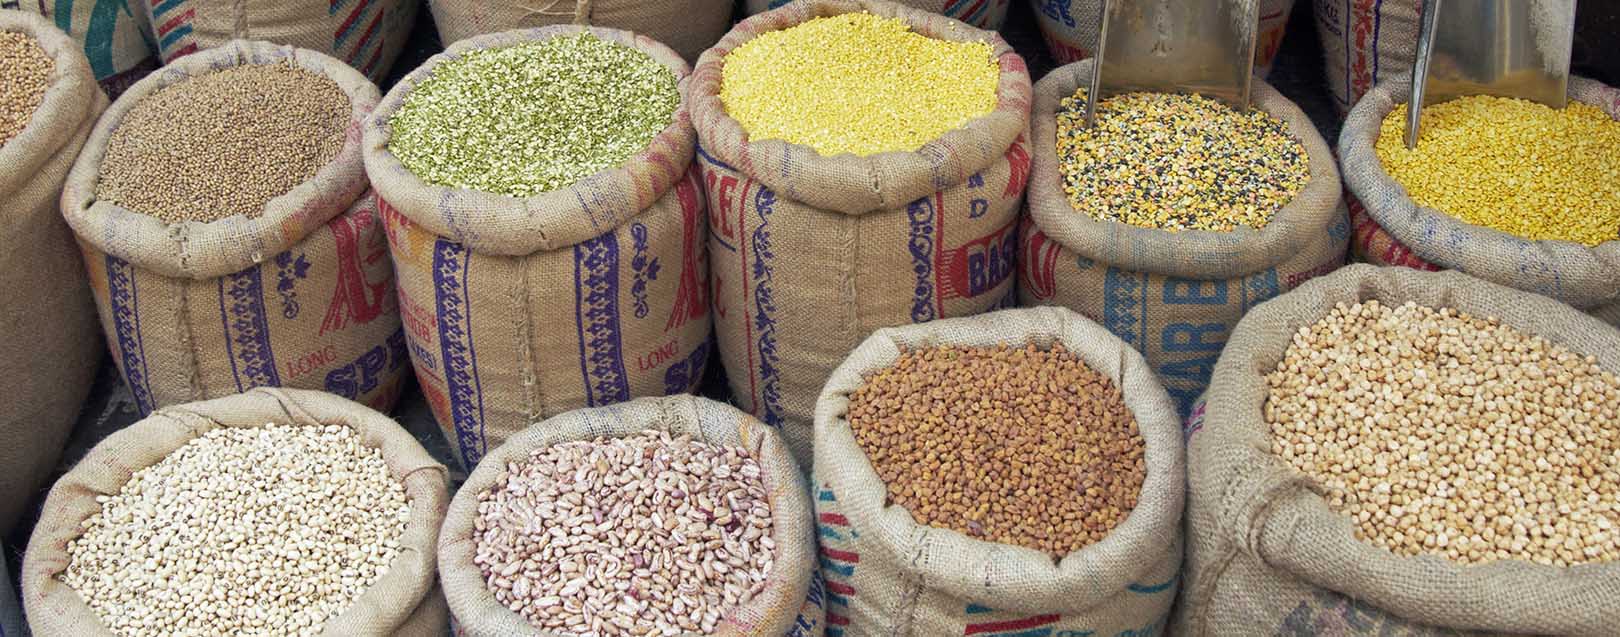 India likely to import 5 MT pulses in Apr-Dec period